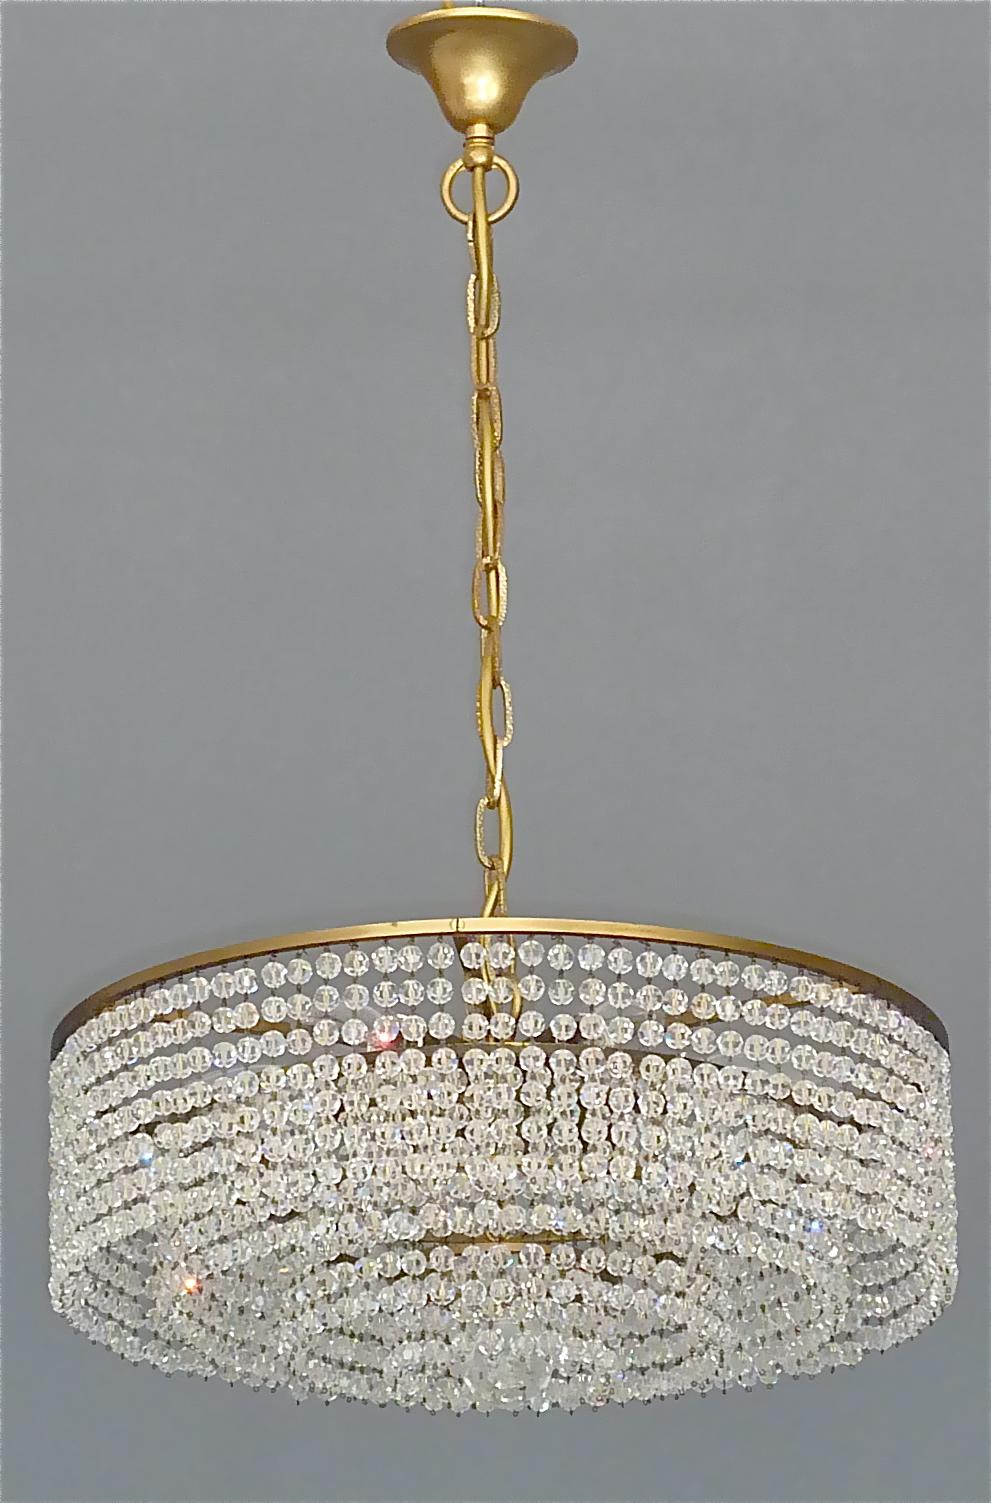 Lobmeyr Crystal Glass String Chandelier Patinated Brass Austria 1950s, No.1 of 2 For Sale 9